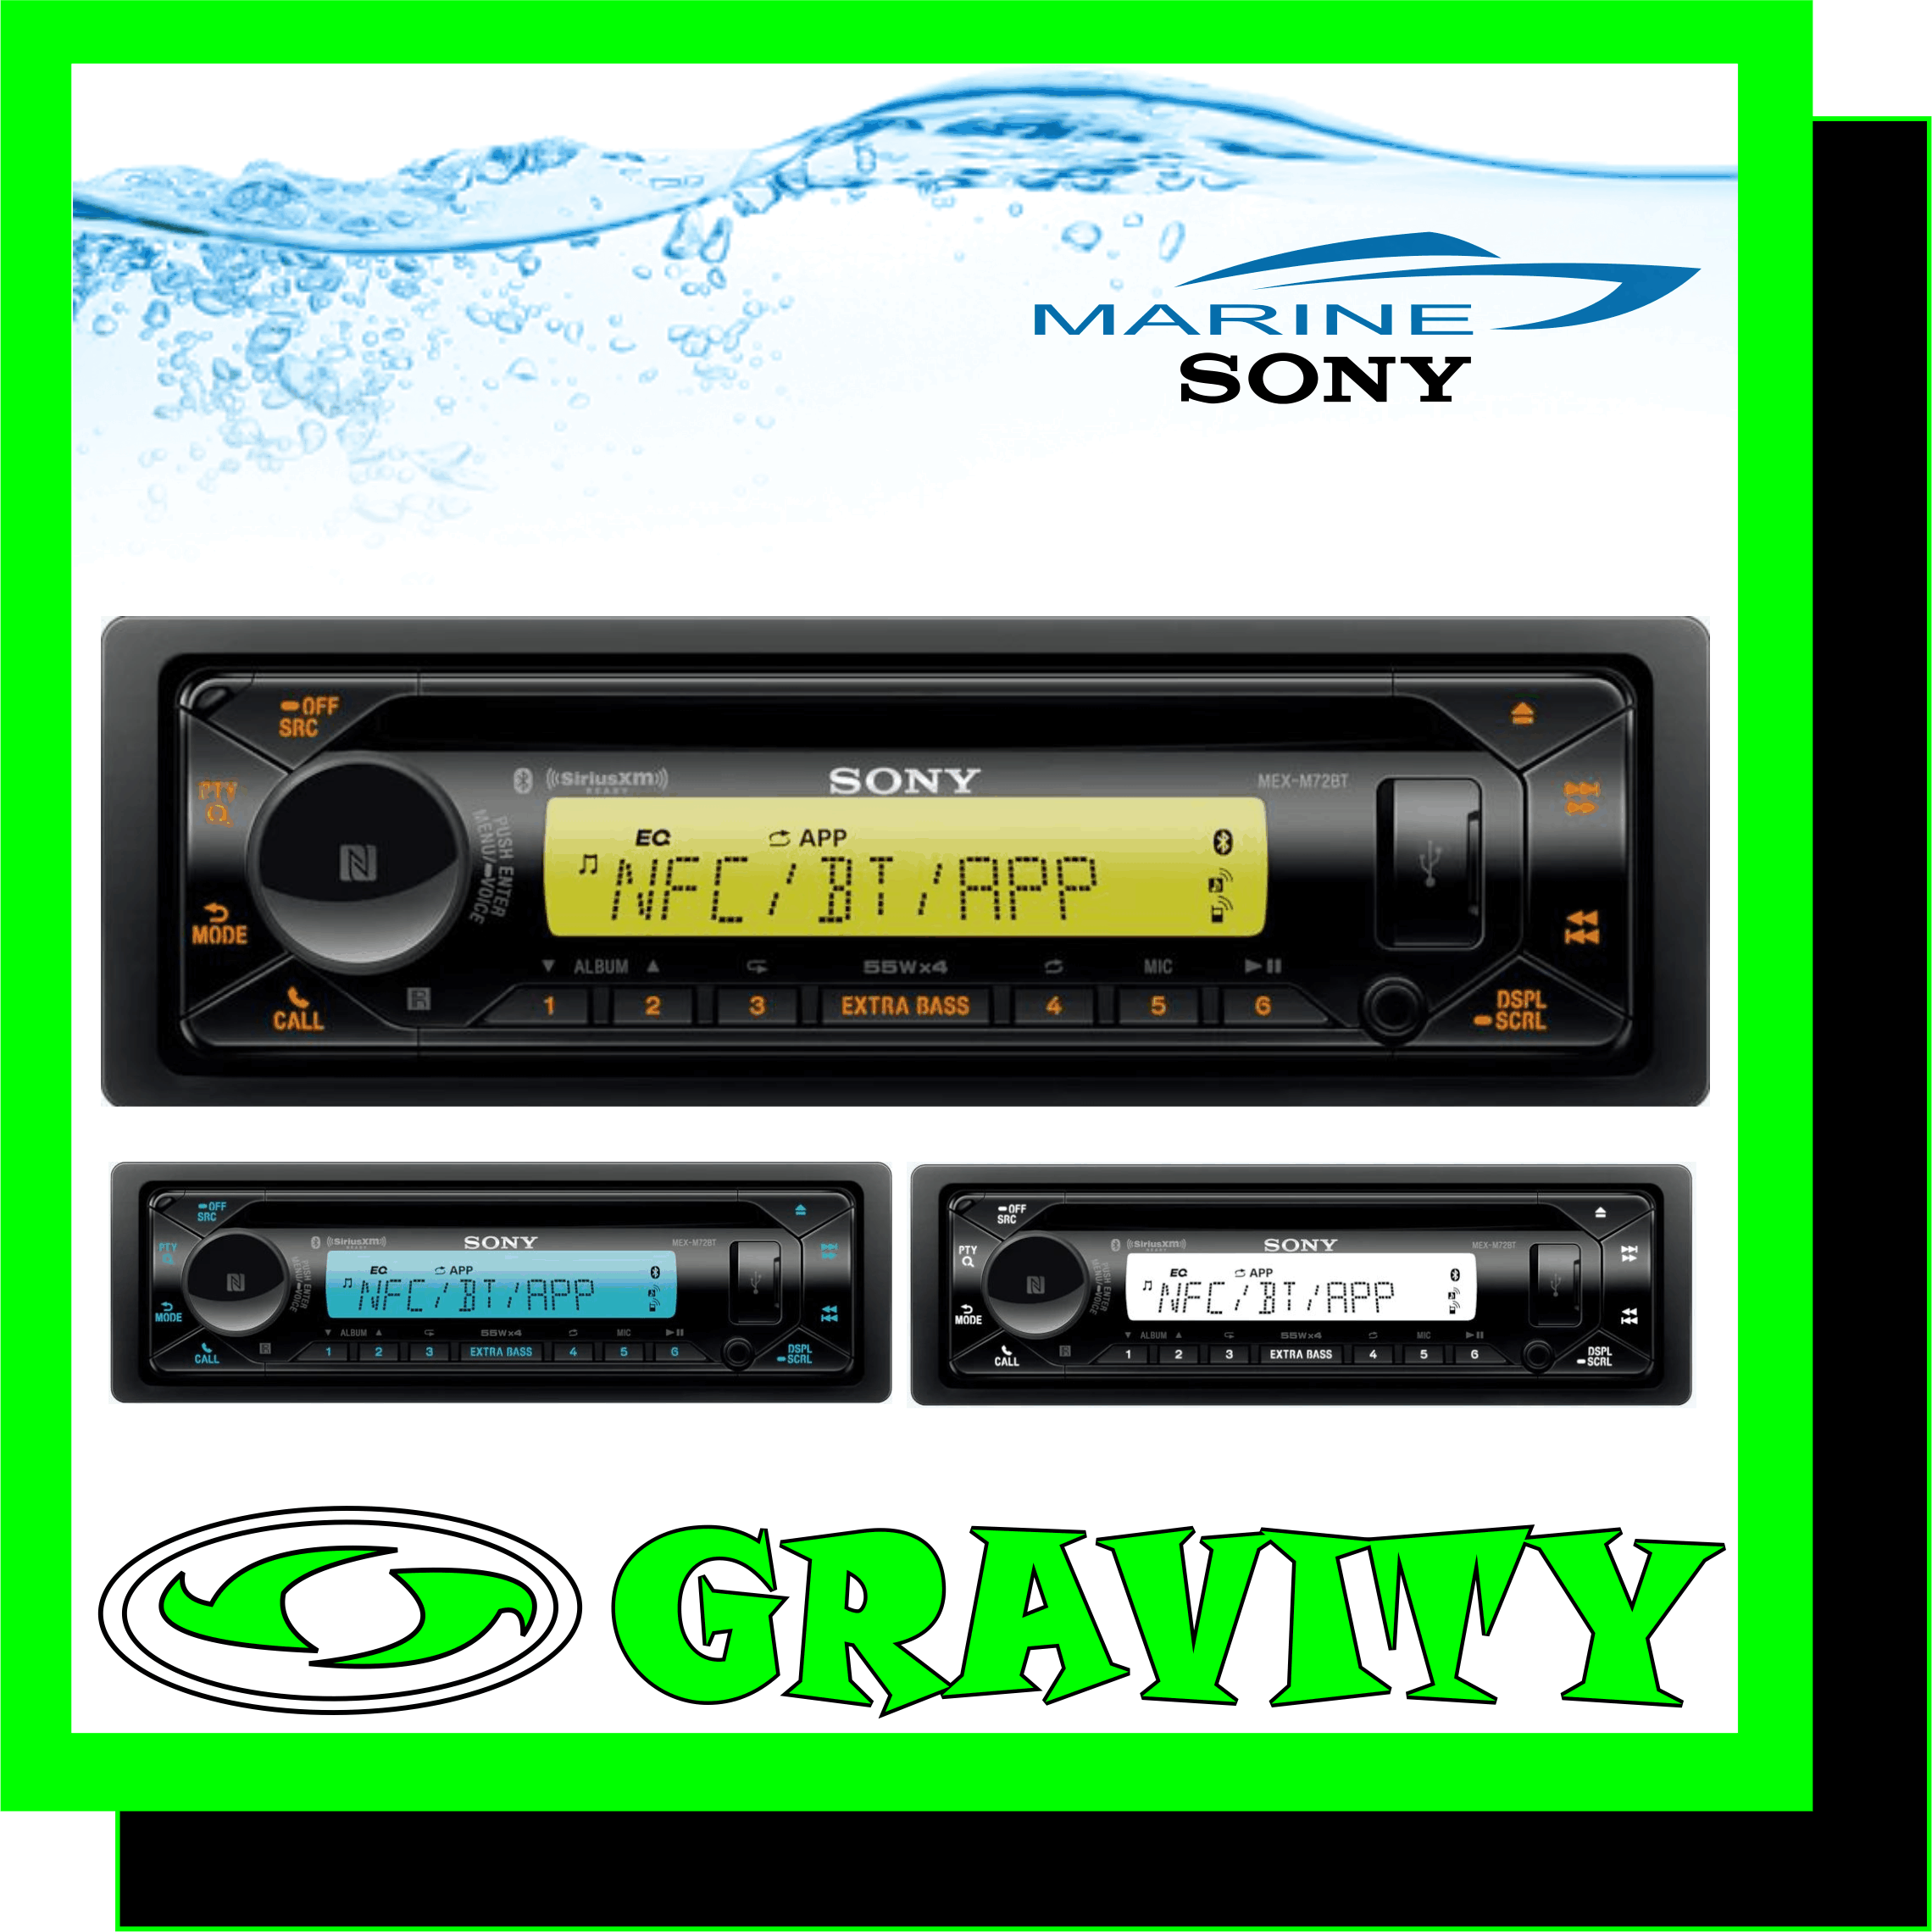 Marine CD Receiver with Bluetooth ? 55W x 4 max. power ? EXTRA BASS ? 3 Pre Out ? 10-band equaliser ? High-pass filter/low-pass filter ? MP3, WMA, FLAC, AAC playback  Connect wirelessly on water, or off-roading Marine CD receiver with Dual BLUETOOTH� connectivity and two-zone color illuminator The MEX-M72BT brings improved communication and illumination out at sea or on any off-road adventure. Dual Bluetooth� connectivity lets you connect a second smartphone wirelessly, so you can make and receive hands-free calls from either phone. The anti-corrosive coating and UV-resistant finish mean that sunshine and sea air are never a problem.  Ready for sun and humidity The UV-resistant finish can handle bright sunlight, and the anti-corrosive coating stands up to salty sea air without fading or cracking.  Tap to connect wirelessly NFC technology lets you connect your Bluetooth� phone instantly, just by tapping it on the receiver's volume knob. No NFC? No problem. You can still manually connect to Bluetooth� wireless connection using your device's settings menu.  Control with your voice Use voice commands to get directions, play music, and communicate with contacts when connected with your smartphone.   Connect two smartphones with Dual Bluetooth� connection Pair your first phone using Bluetooth� for full access to music playback, and communication features. A second phone can be connected simultaneously for making and receiving calls.  Bring Siri along for the ride Hook up your iOS device to control its music, navigation, messaging, and more, using Siri Eyes Free  Voice control for Android Use voice control to get directions, send messages, and play tracks on your Android smartphone.  Control by talking Enjoy helpful smartphone features without taking your eyes off the view ahead. Voice control lets you manage music and communicate with contacts, all via simple spoken commands.  Bring great sound to every journey Wherever you're going, enjoy clear and natural sound driven by powerful amplification and customizable audio settings.  High-power amp for rich, clear sound The built-in four-channel amplifier delivers 4x55W of power, for loud and natural sound.  USB input lets you play music from your iPhone or iPod You can easily play music from your iOS device. Just plug in with a USB cable and control basic playback functions while seeing track information on the display.  AOA 2.0 lets you play music from your smartphone Enjoy downloaded or streamed music from your smartphone with Android Open Accessory 2.0 support. Simply plug into the USB port, then play your favorite music apps.